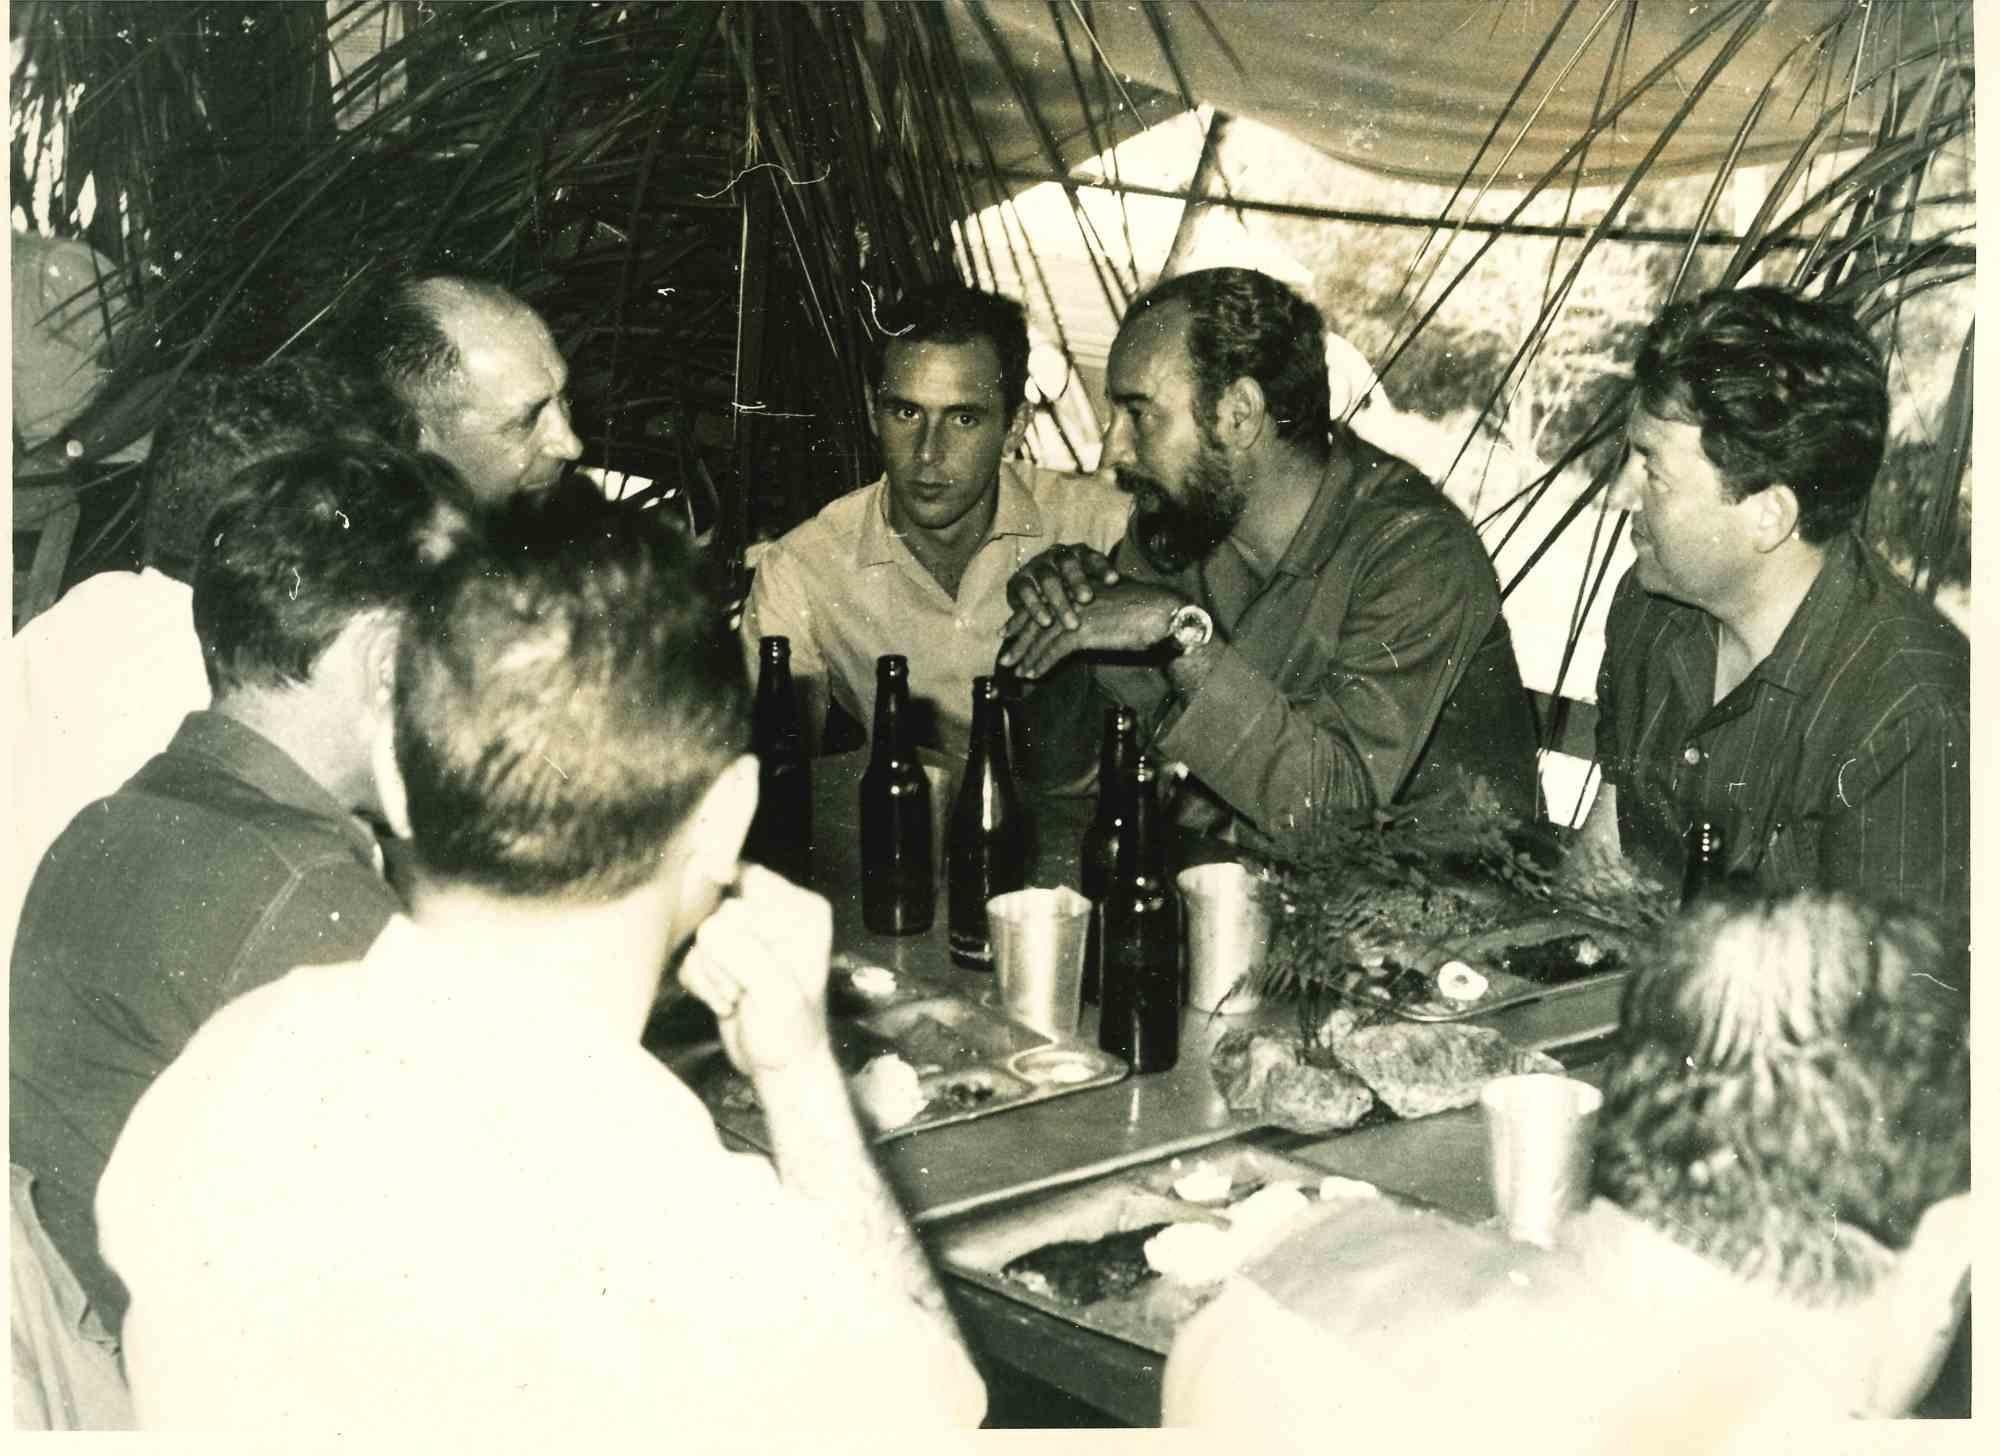 Unknown Figurative Photograph - Fidel Castro with Cuban Socialists - Historical Photo - 1960s